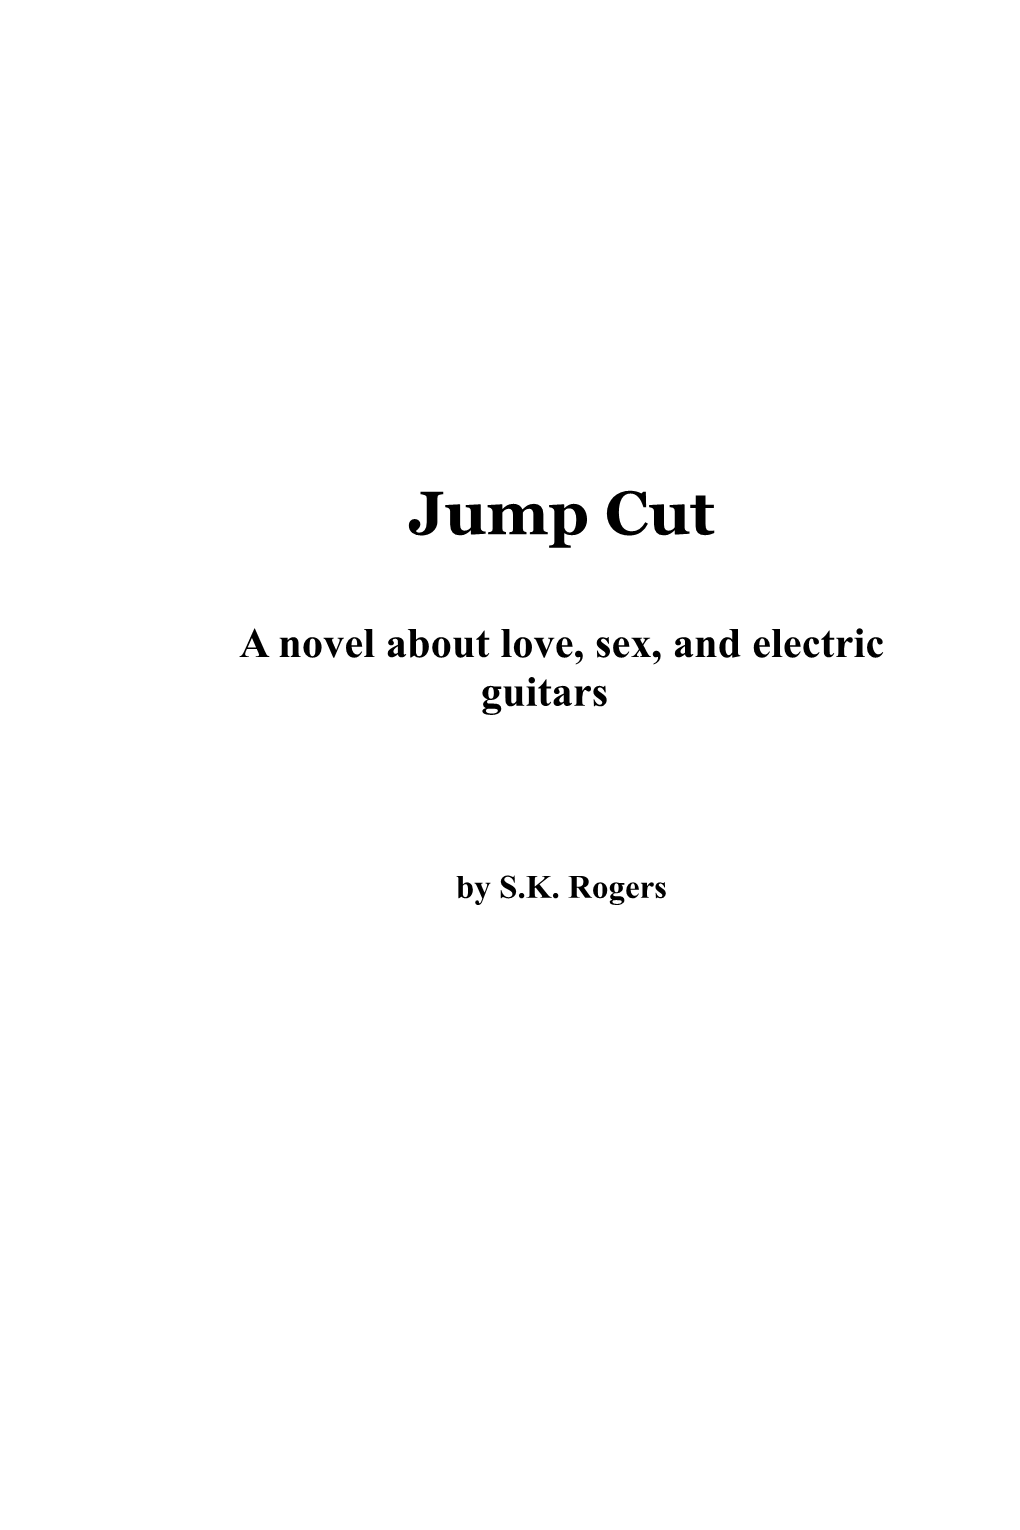 Jump Cut: a Novel About Love, Sex, and Electric Guitars